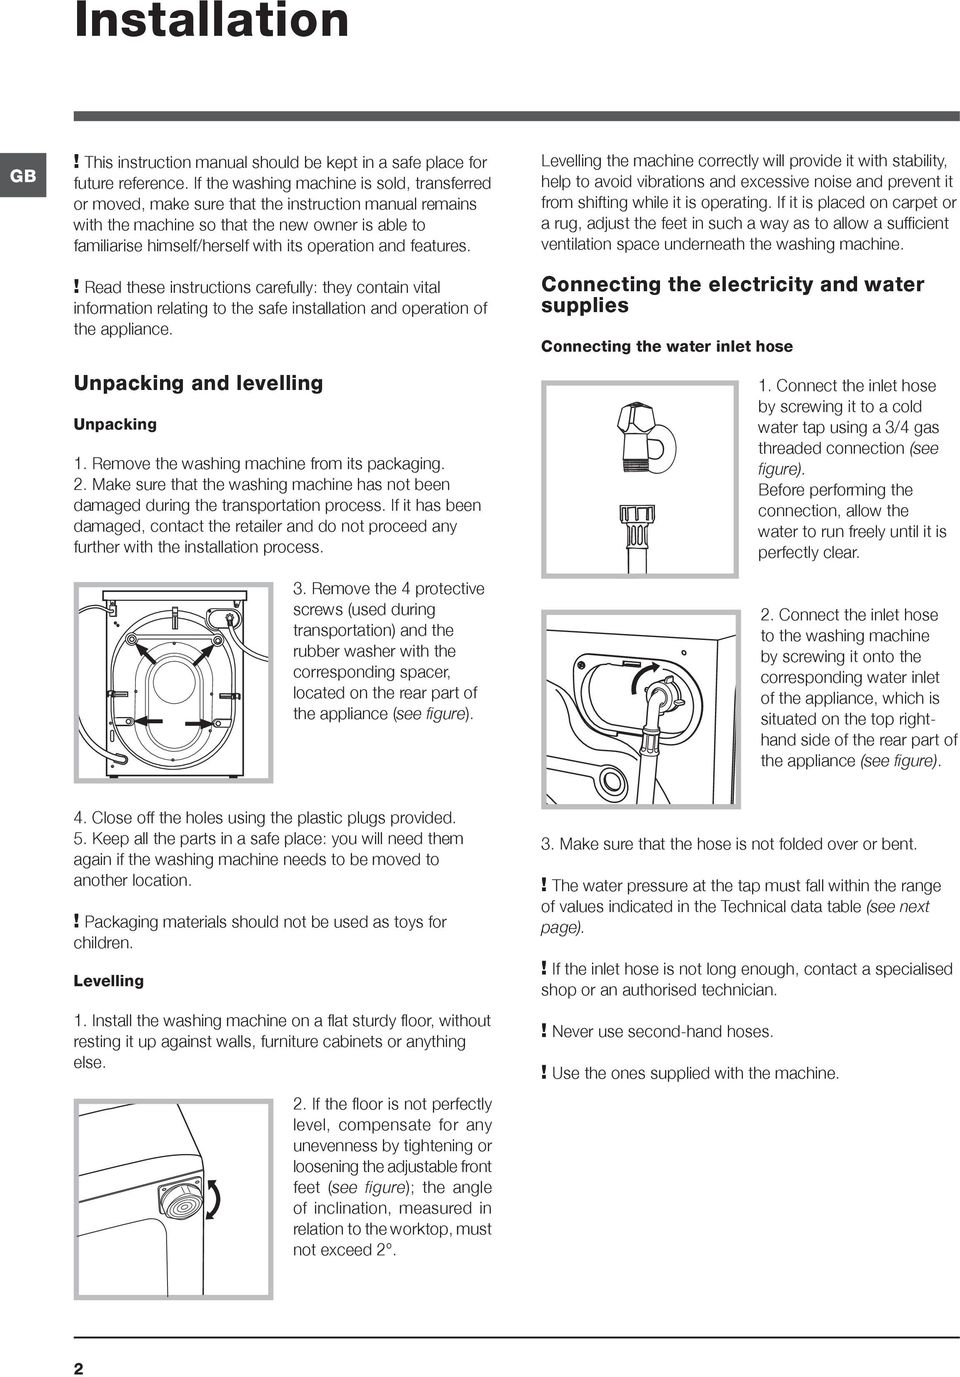 and features.! Read these instructions carefully: they contain vital information relating to the safe installation and operation of the appliance. Unpacking and levelling Unpacking 1.